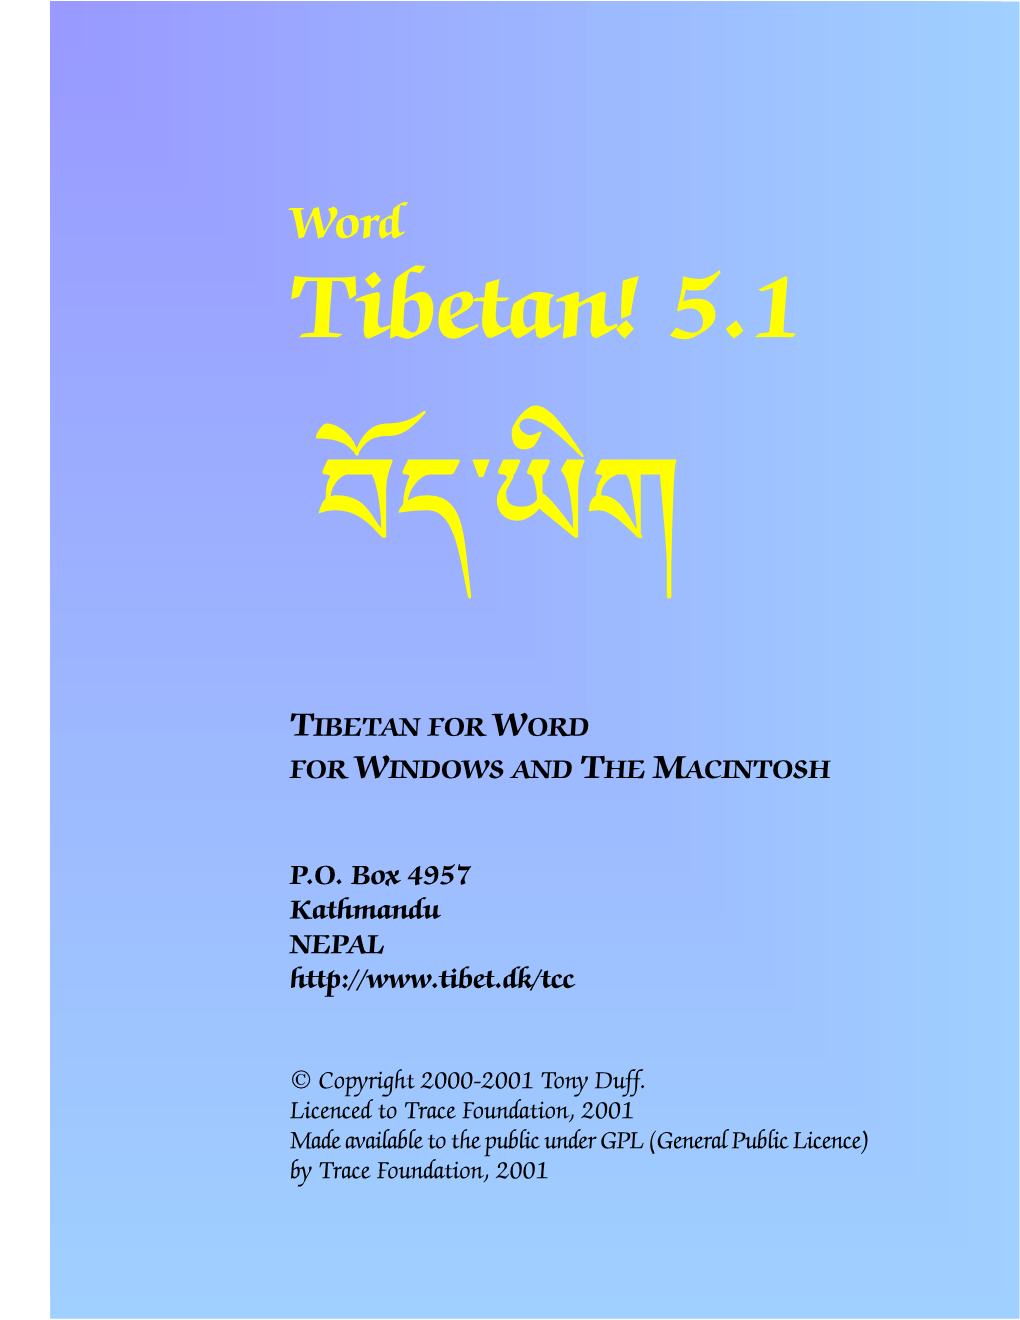 Tibetan! 5.1 for Word Manual.Pdf the Complete Manual for Both Windows and Macintosh in Adobe Acrobat PDF Format